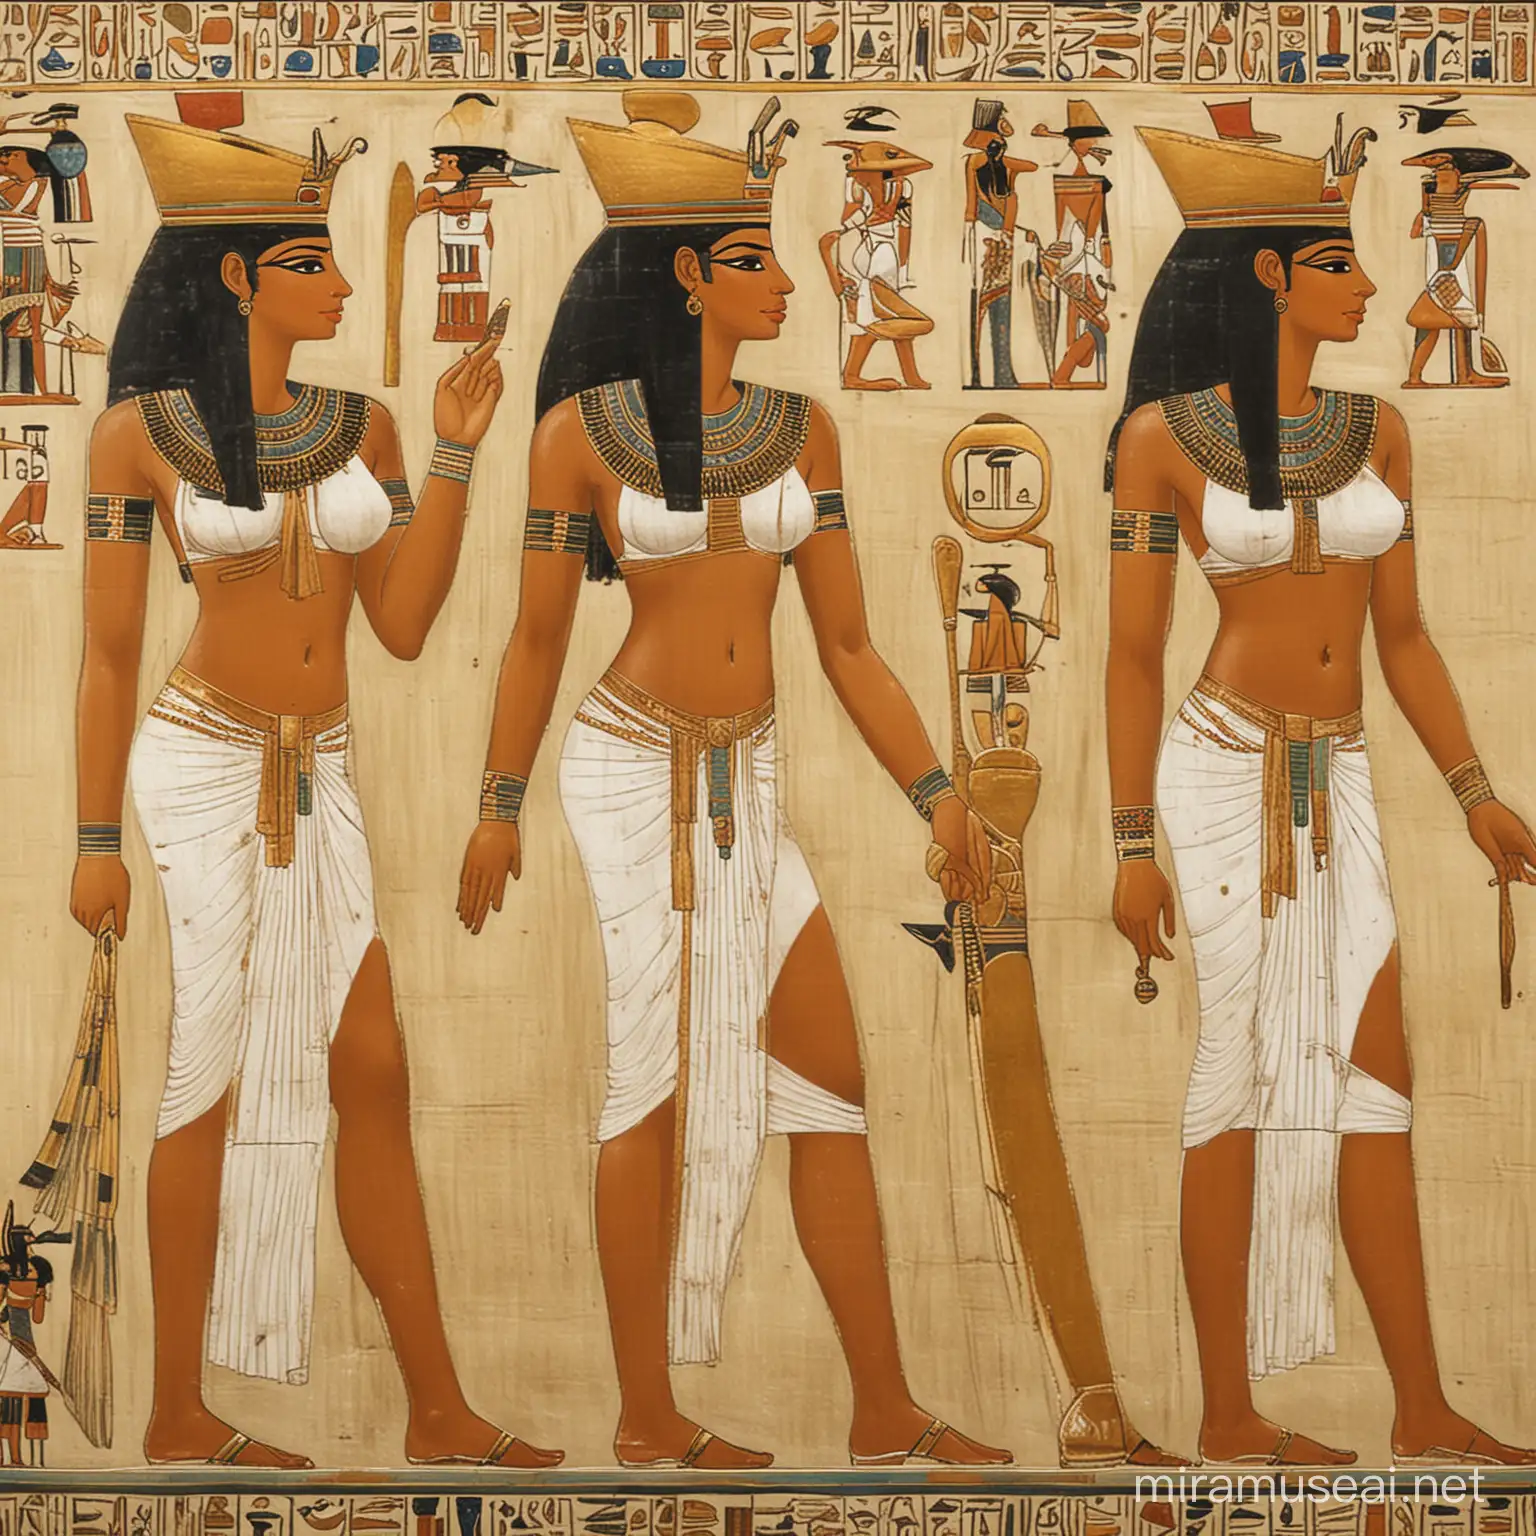 three Egyptian queens side by side in 1900 BC with busty figure. Safe for work